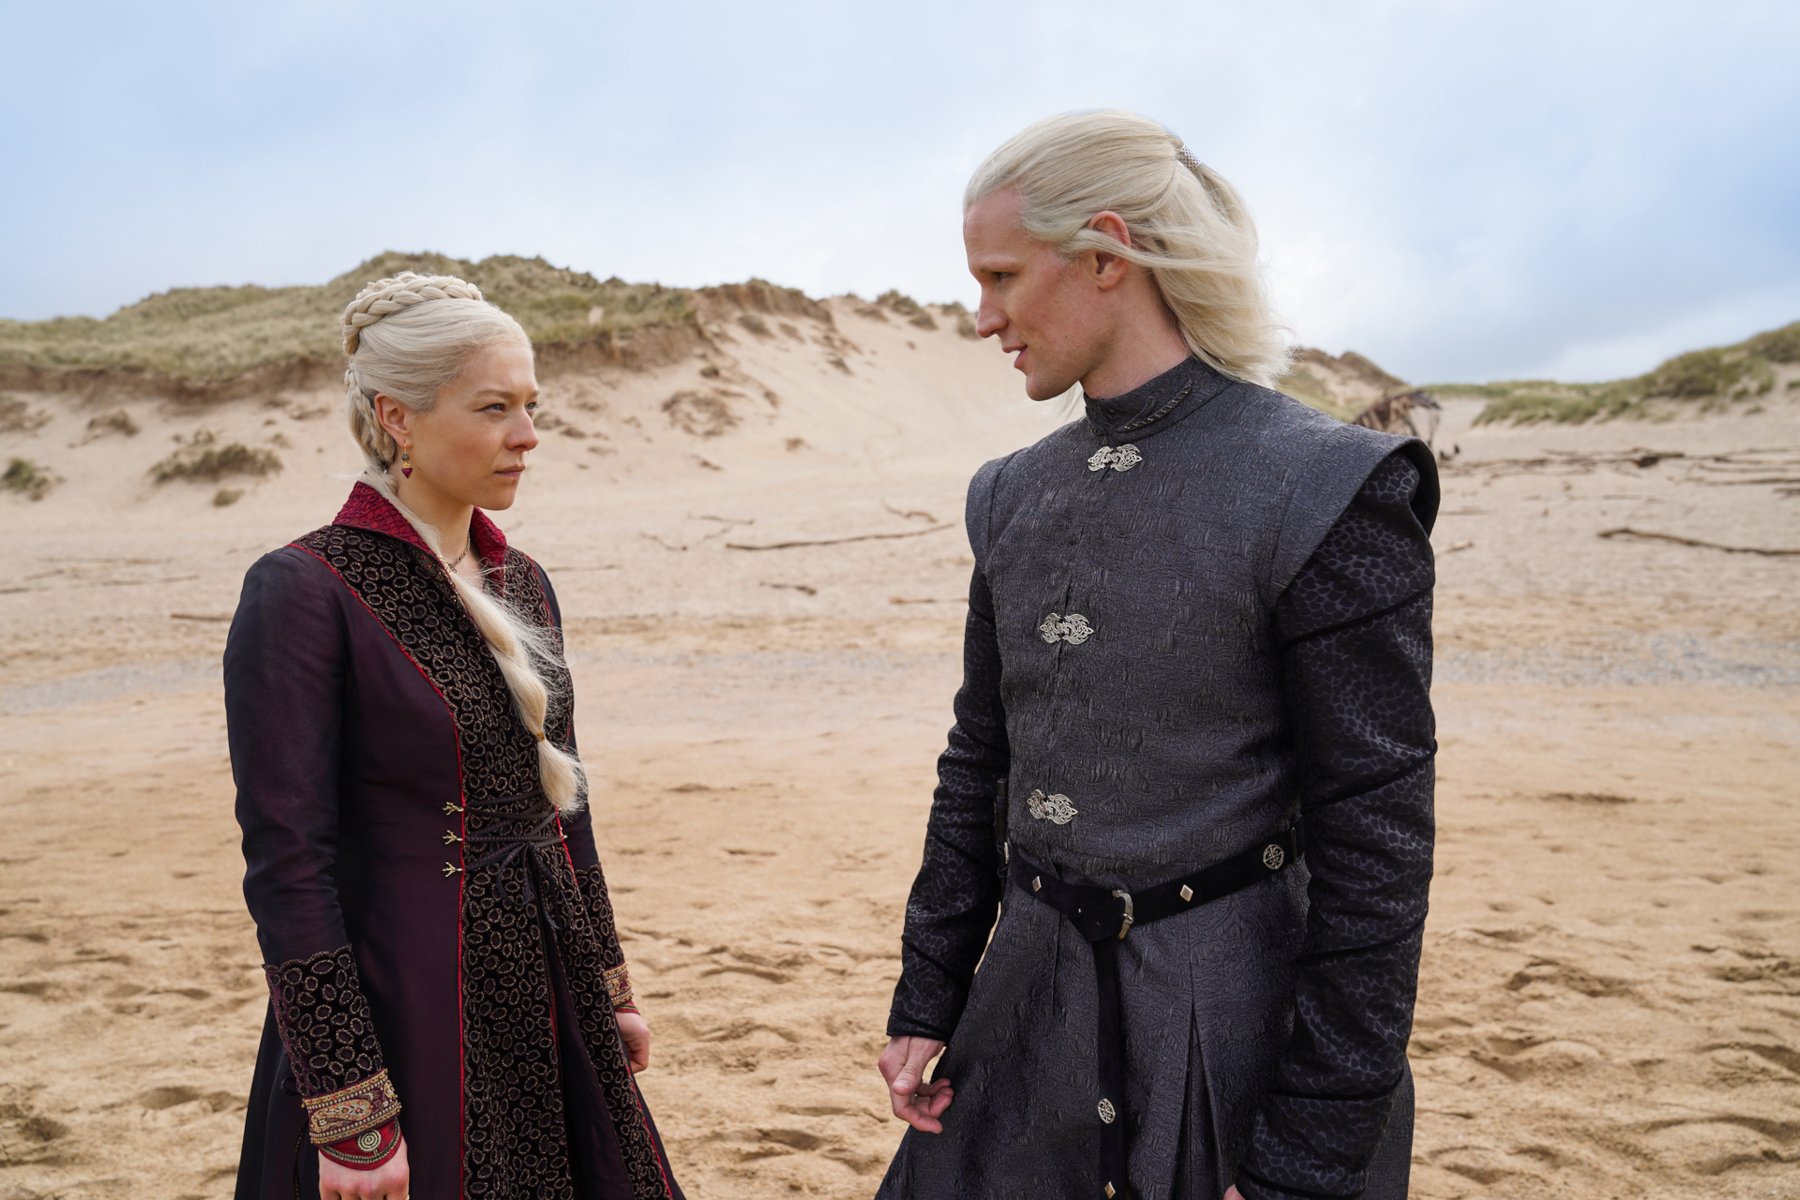 Emma D'Arcy and Matt Smith in 'House of the Dragon,' which takes place 200 years before 'Game of Thrones.' In the photo, both actors are staring at one another and there's sand behind them.